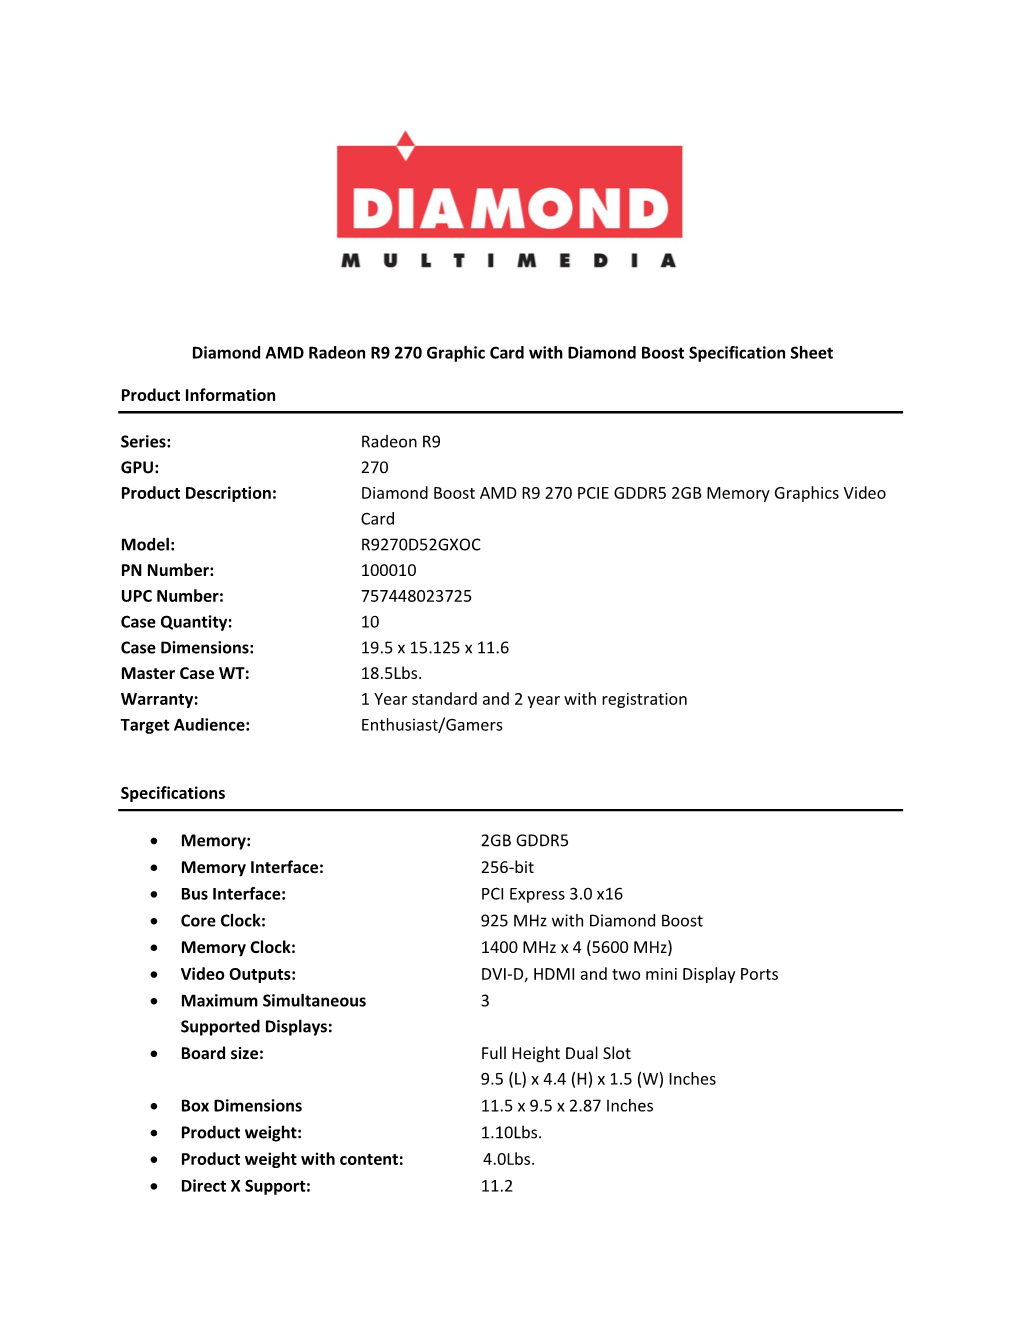 Radeon R9 270 Graphic Card with Diamond Boost Specification Sheet